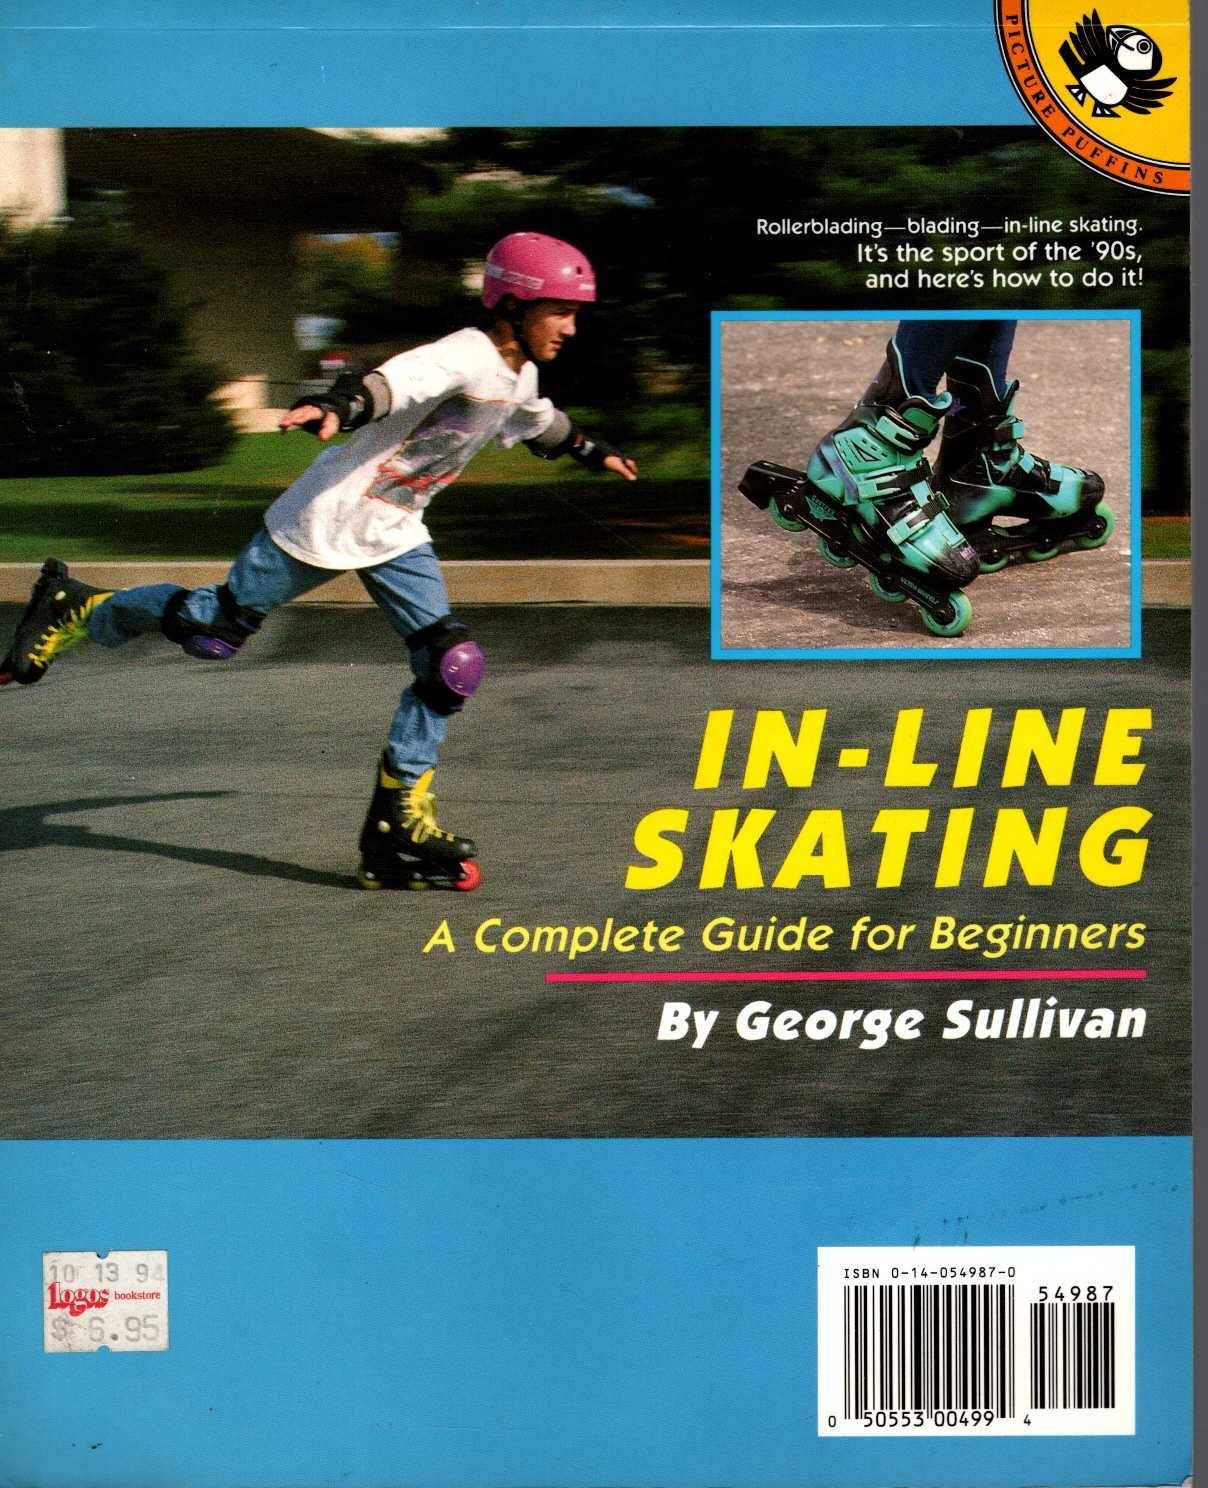 George Sullivan  IN-LINE SKATING magnified rear book cover image